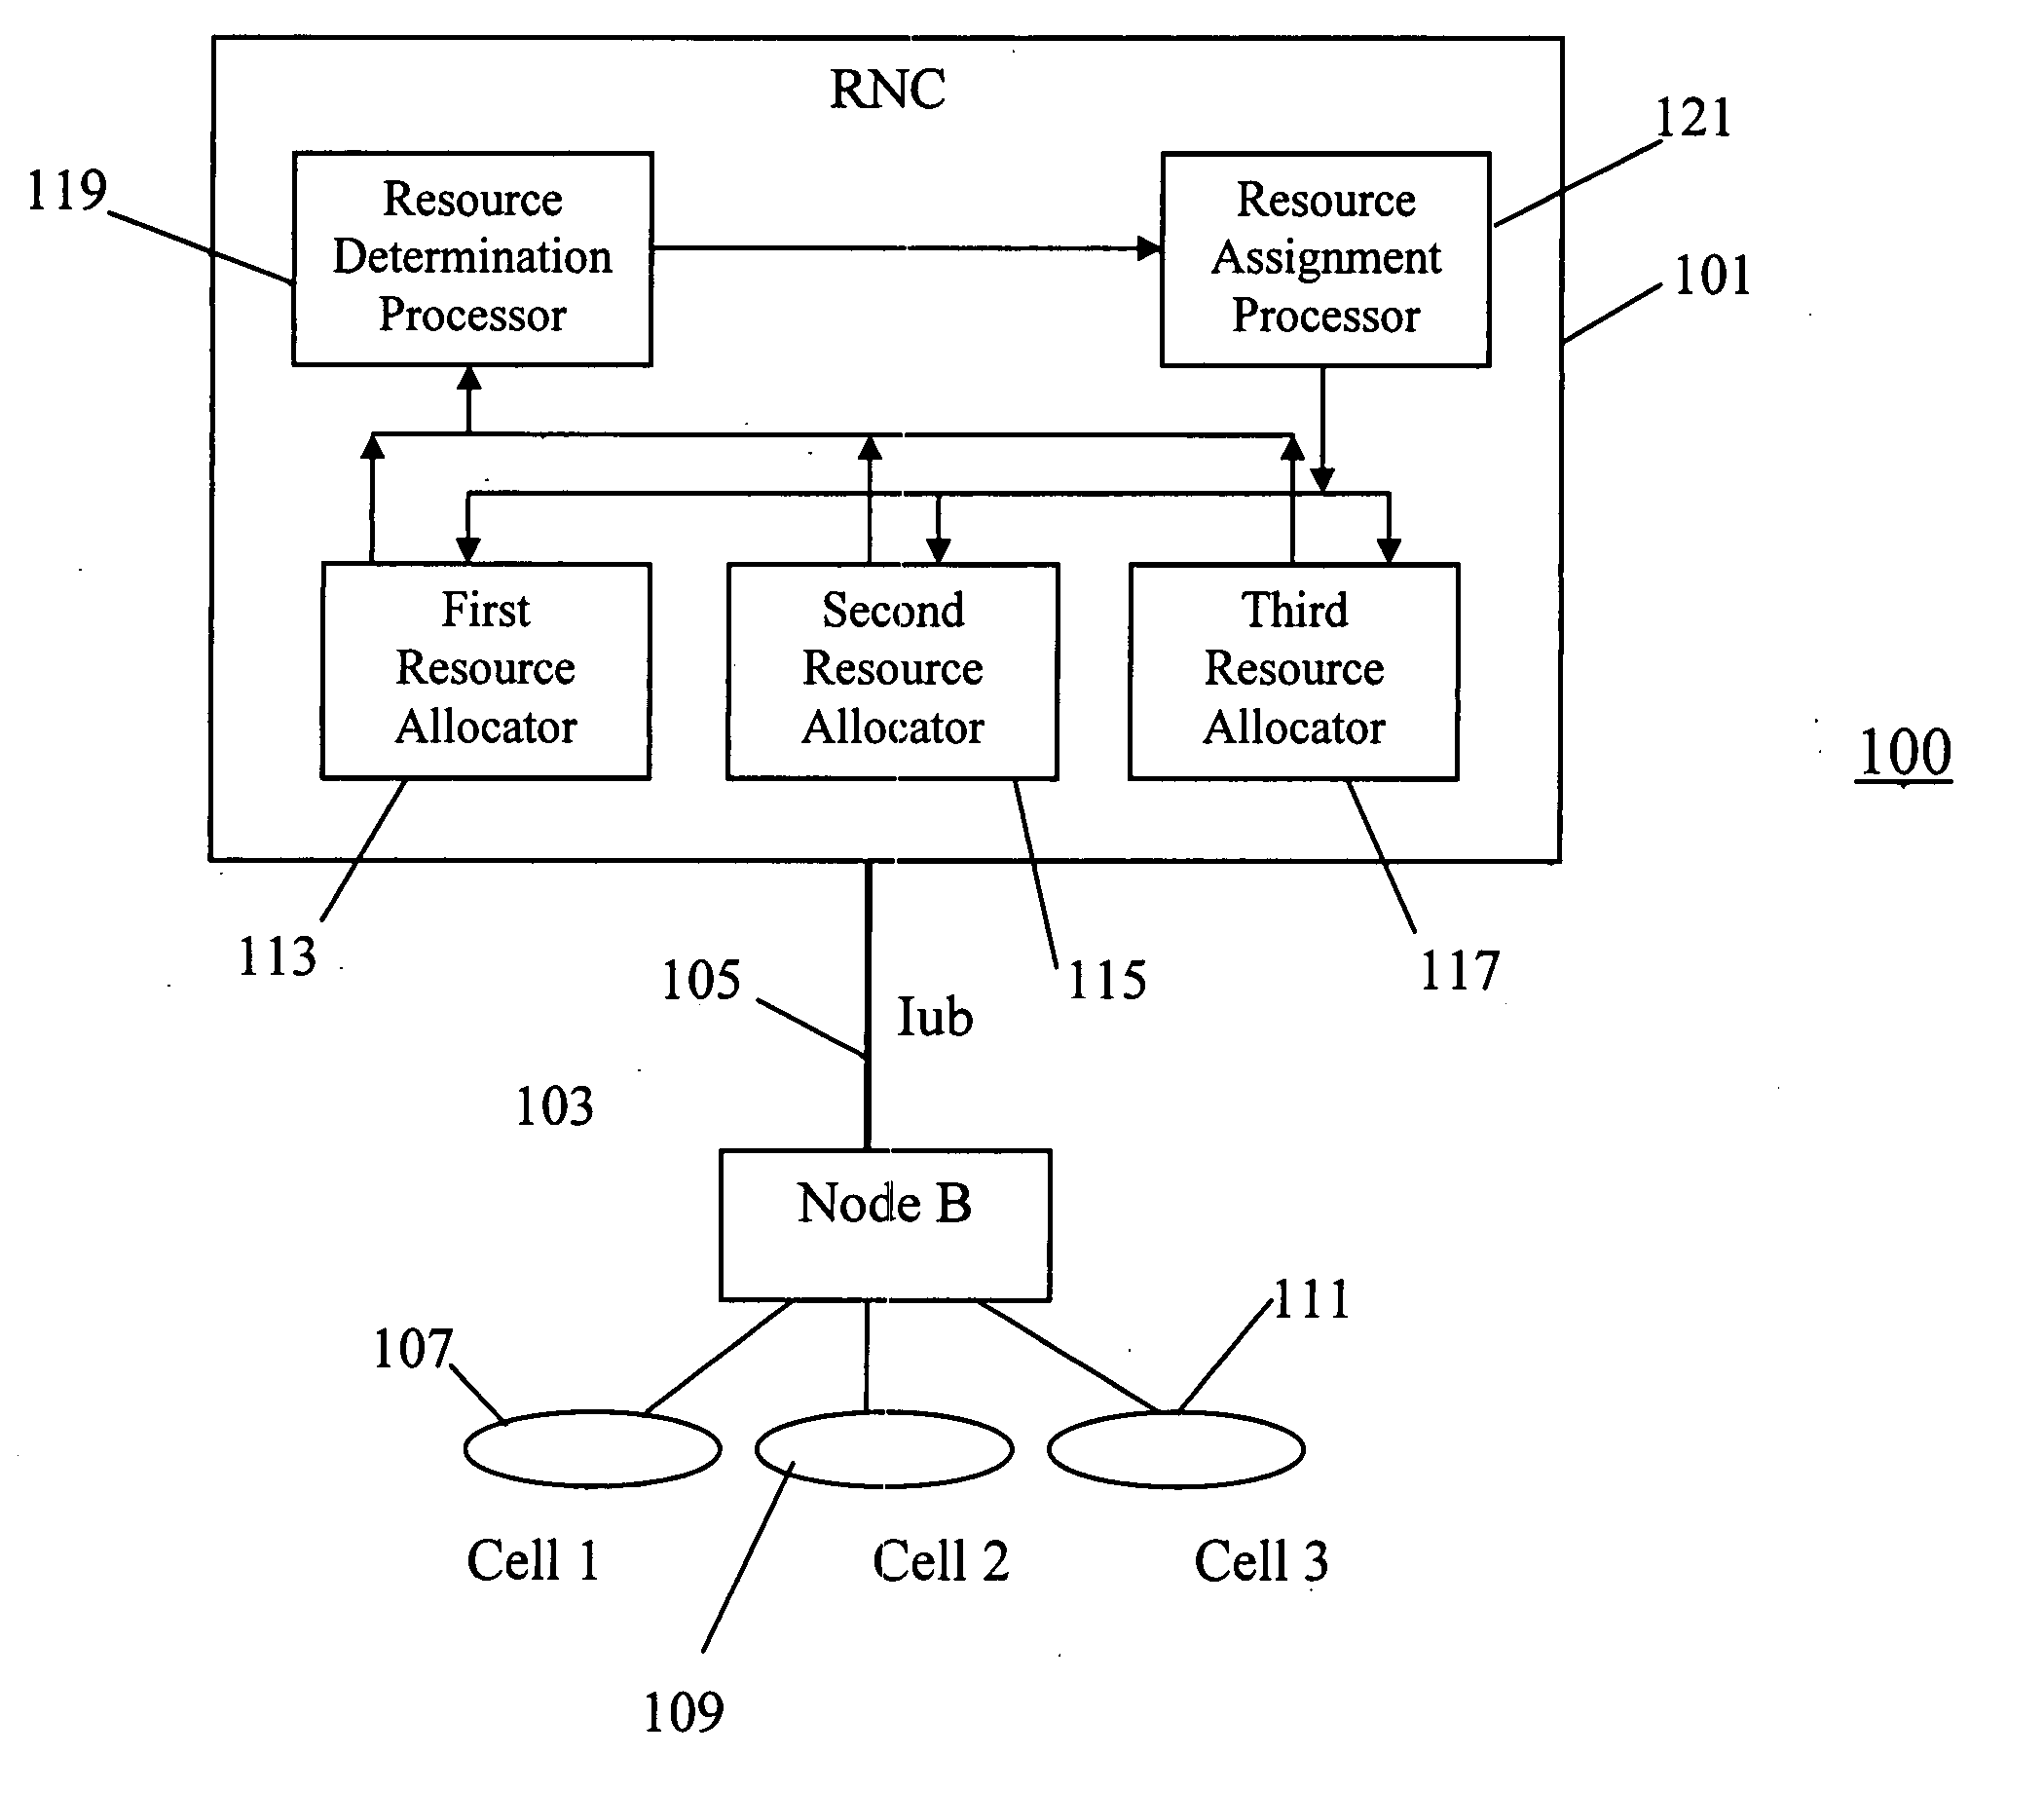 Scheduling data across a shared communication link in a cellular communication system